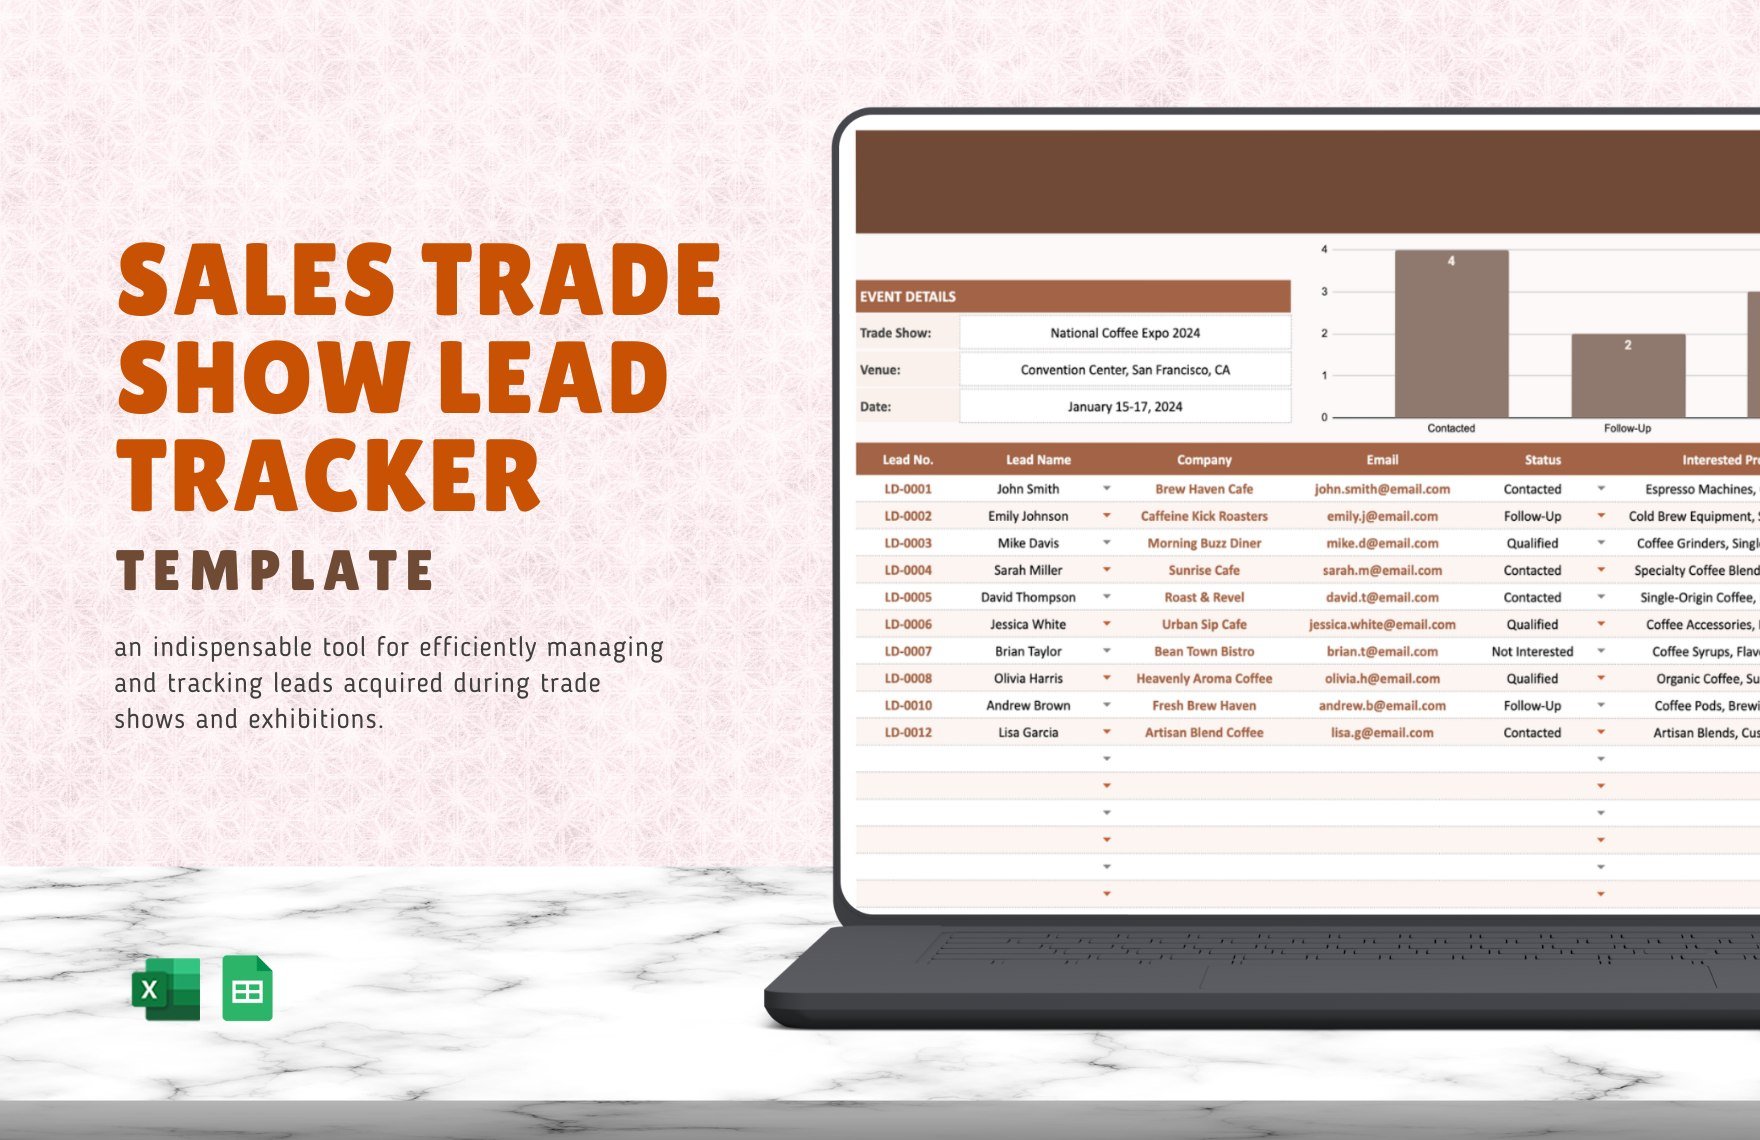 Sales Trade Show Lead Tracker Template